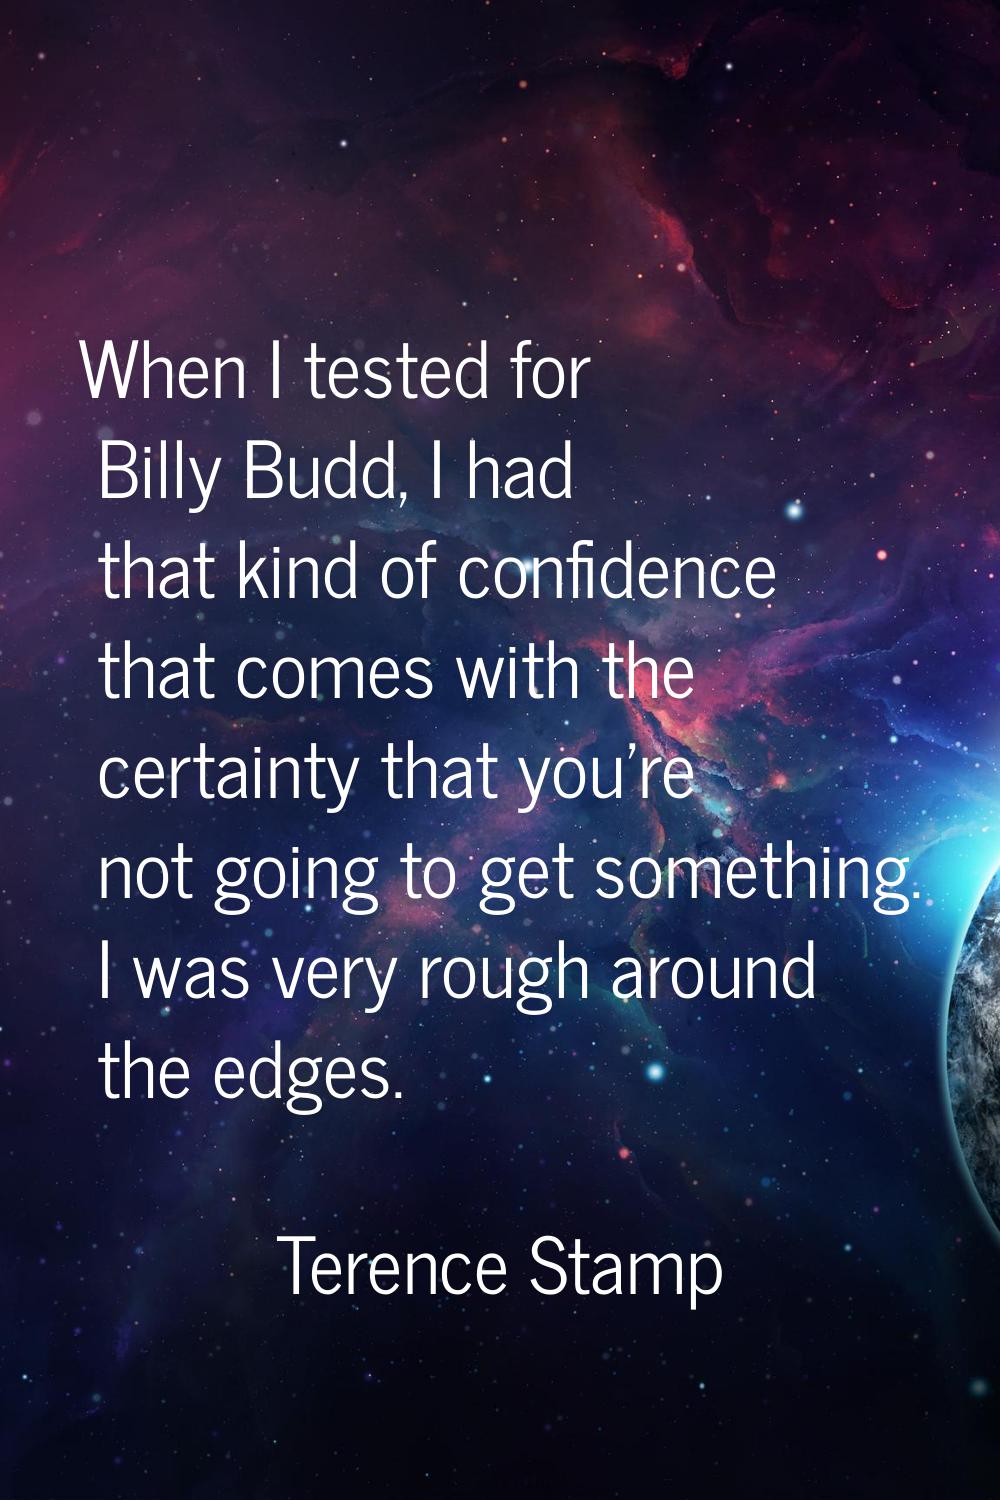 When I tested for Billy Budd, I had that kind of confidence that comes with the certainty that you'